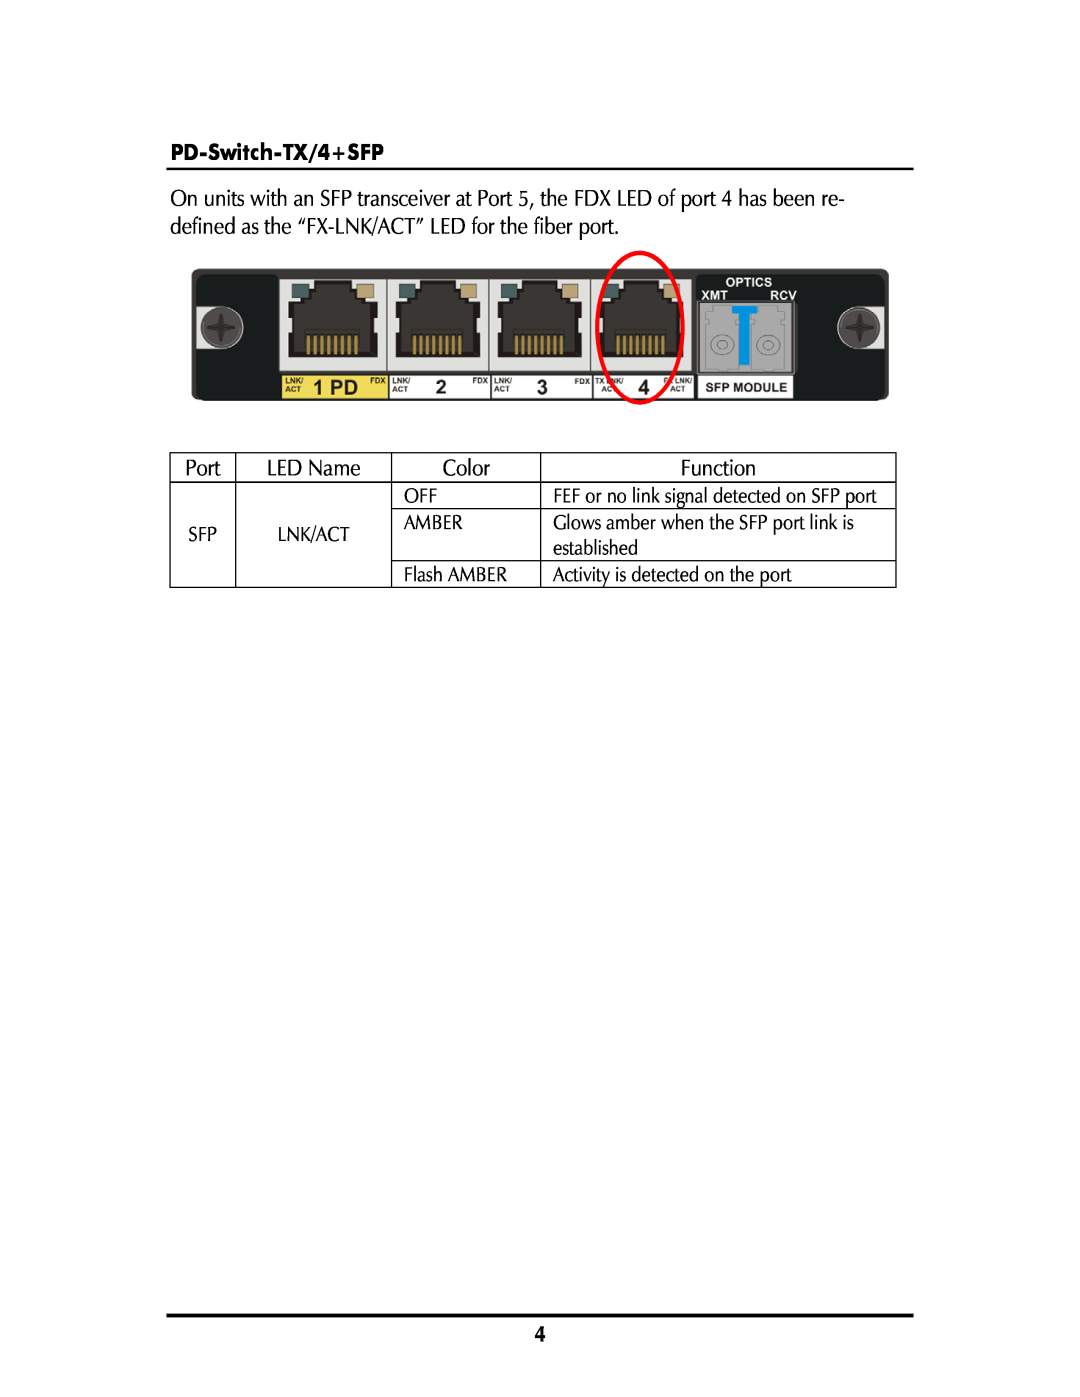 IMC Networks operation manual PD-Switch-TX/4+SFP, FEF or no link signal detected on SFP port 